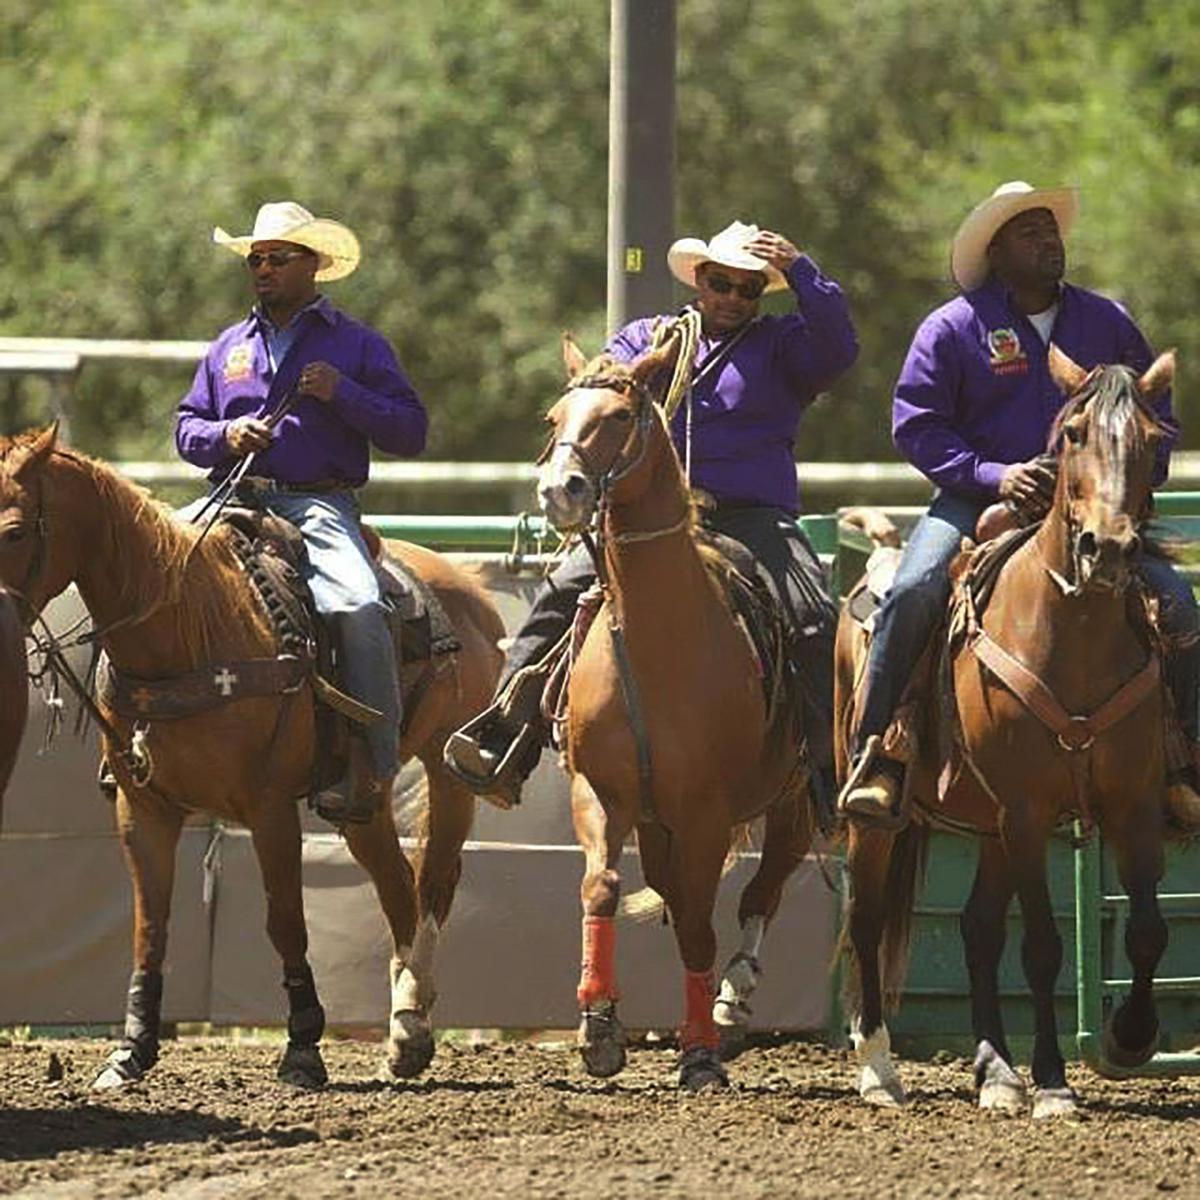 'Black guys don't rodeo'? They do at this show | Entertainment | bakersfield.com